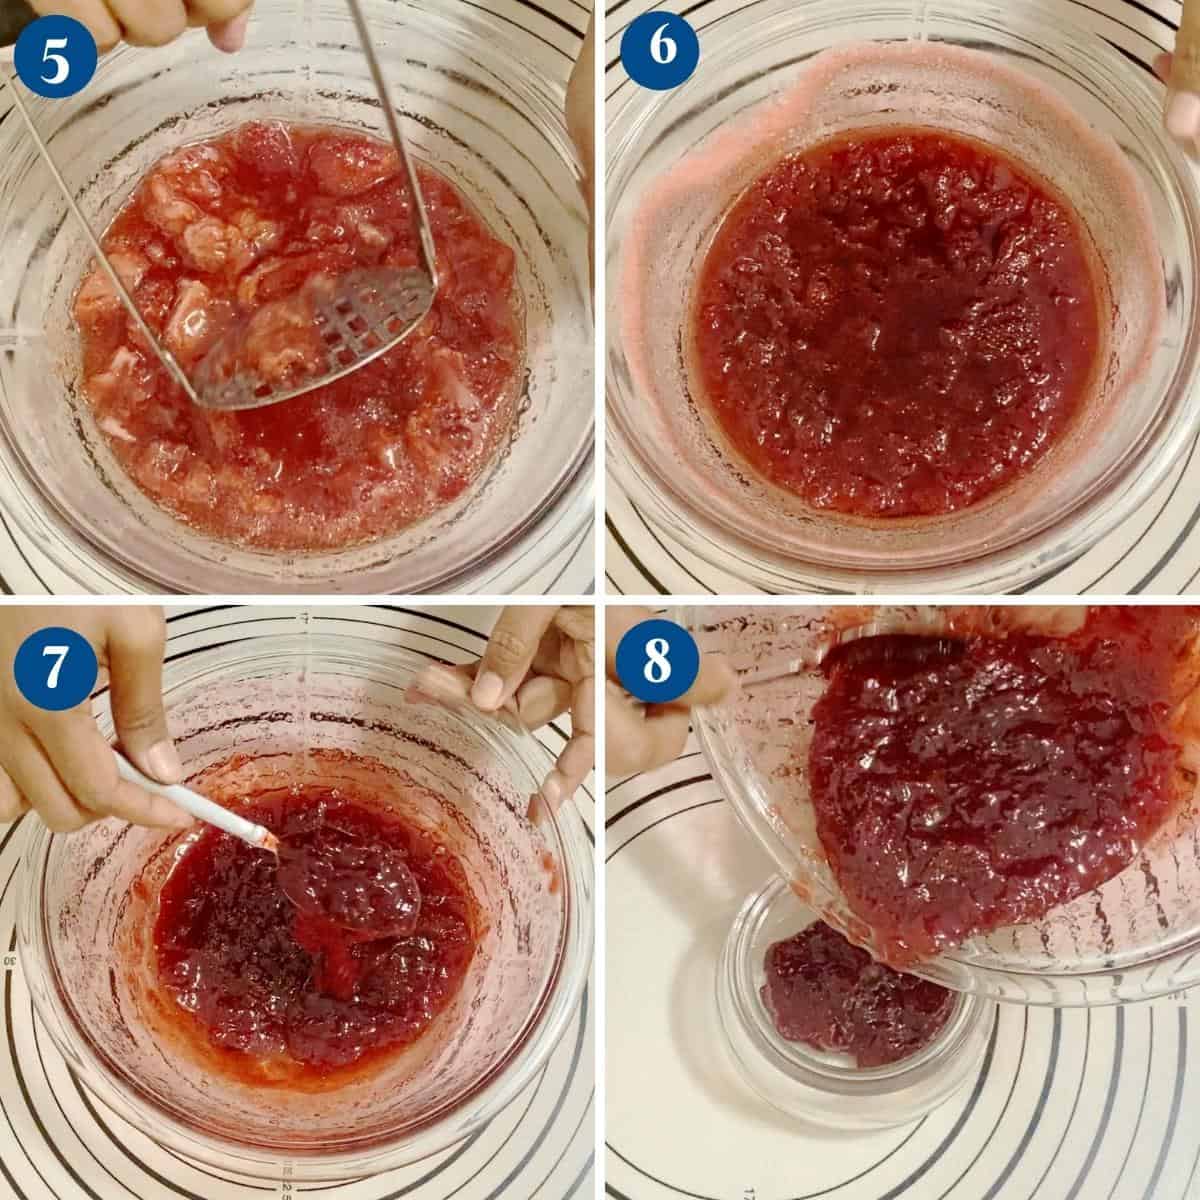 Progress pictures for strawberry jam in the microwave.